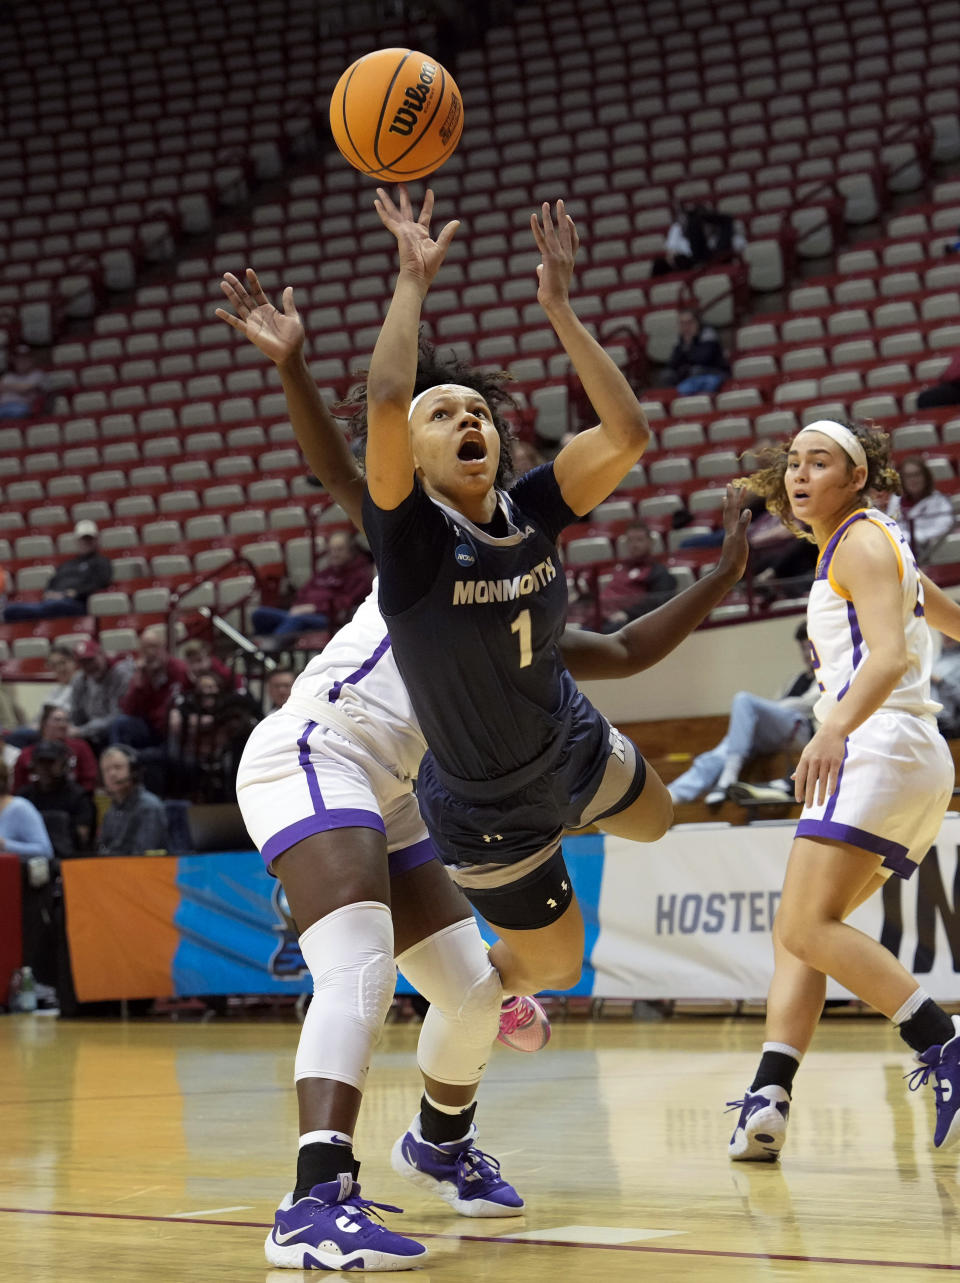 Monmouth guard Ariana Vanderhoop, right, shoots after being fouled by Tennessee Tech guard Reghan Grimes during the first half of a First Four college basketball game in the NCAA women's Basketball Tournament in Bloomington, Ind., Thursday, March 16, 2023. (AP Photo/AJ Mast)